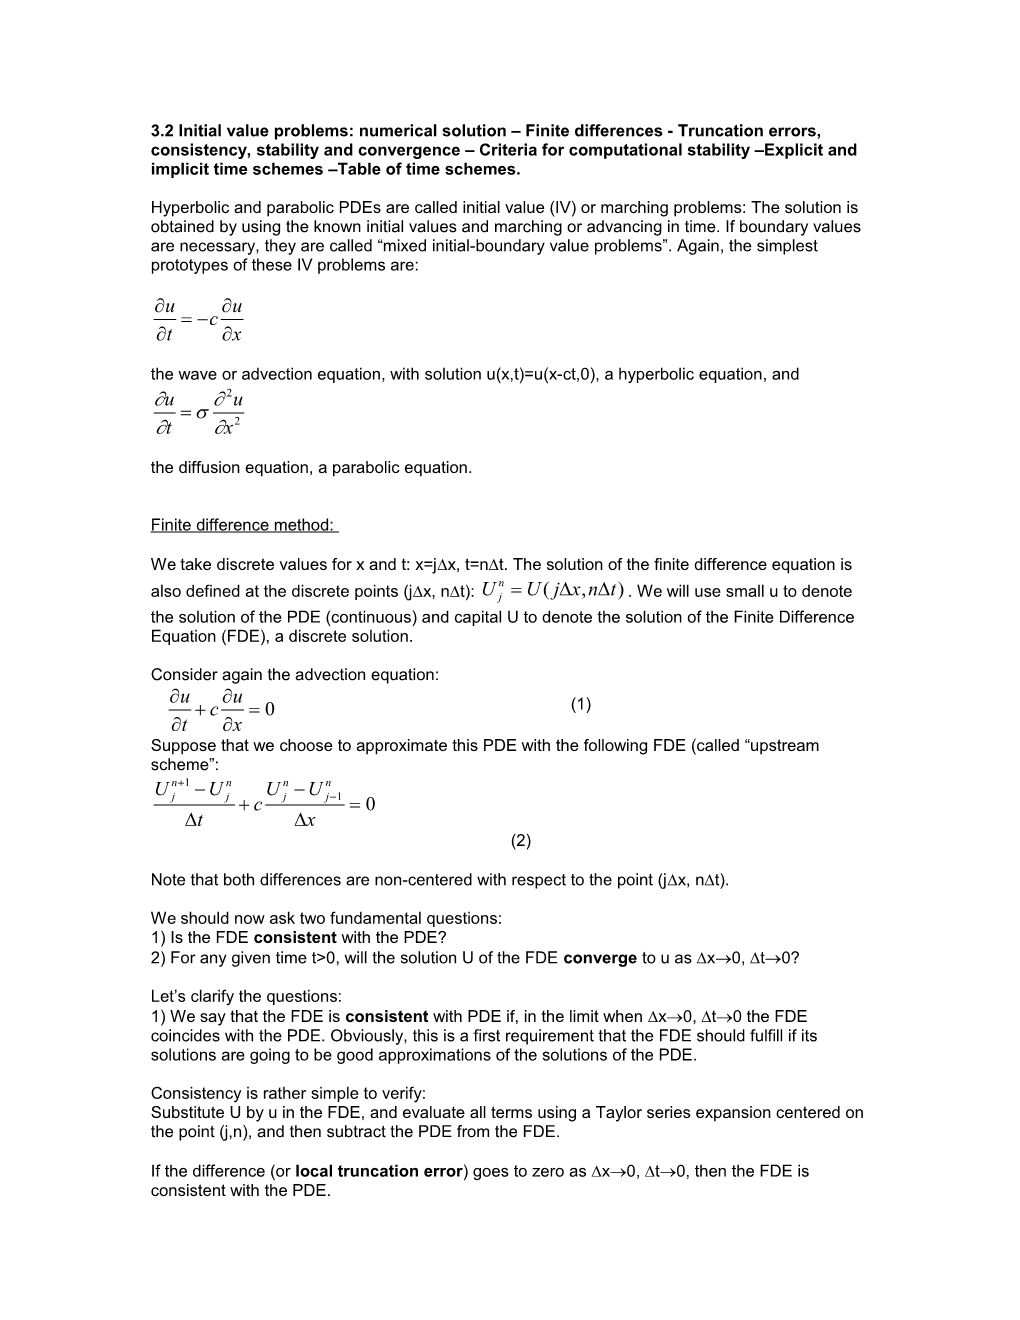 3.2 Initial Value Problems: Numerical Solution Finite Differences - Truncation Errors